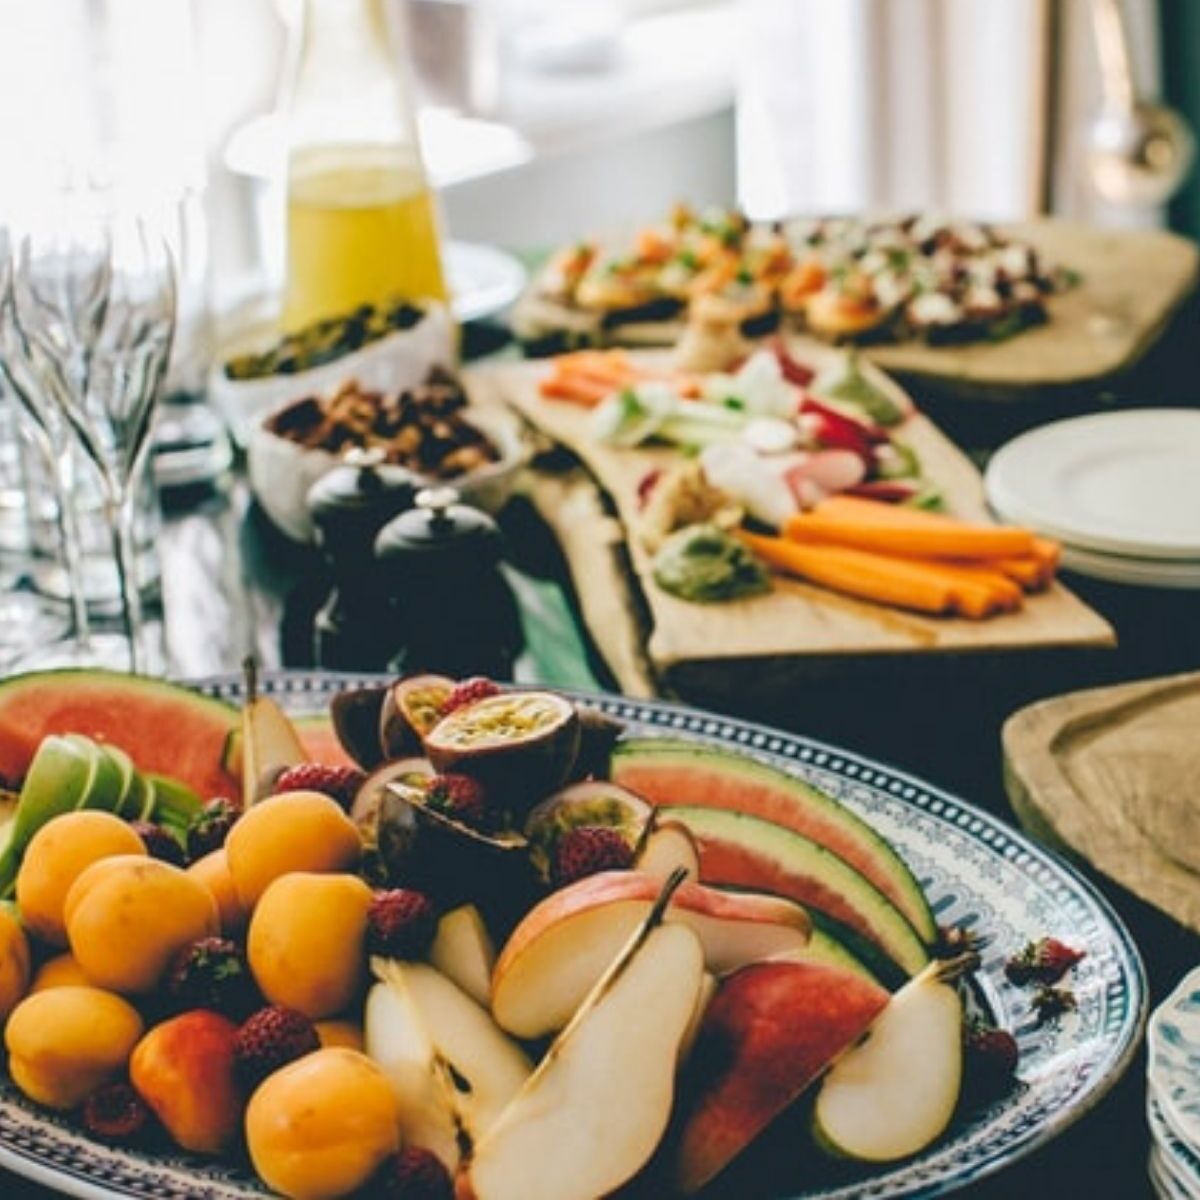 healthy food shared at meals is an important part of the mediterranean lifestyle.